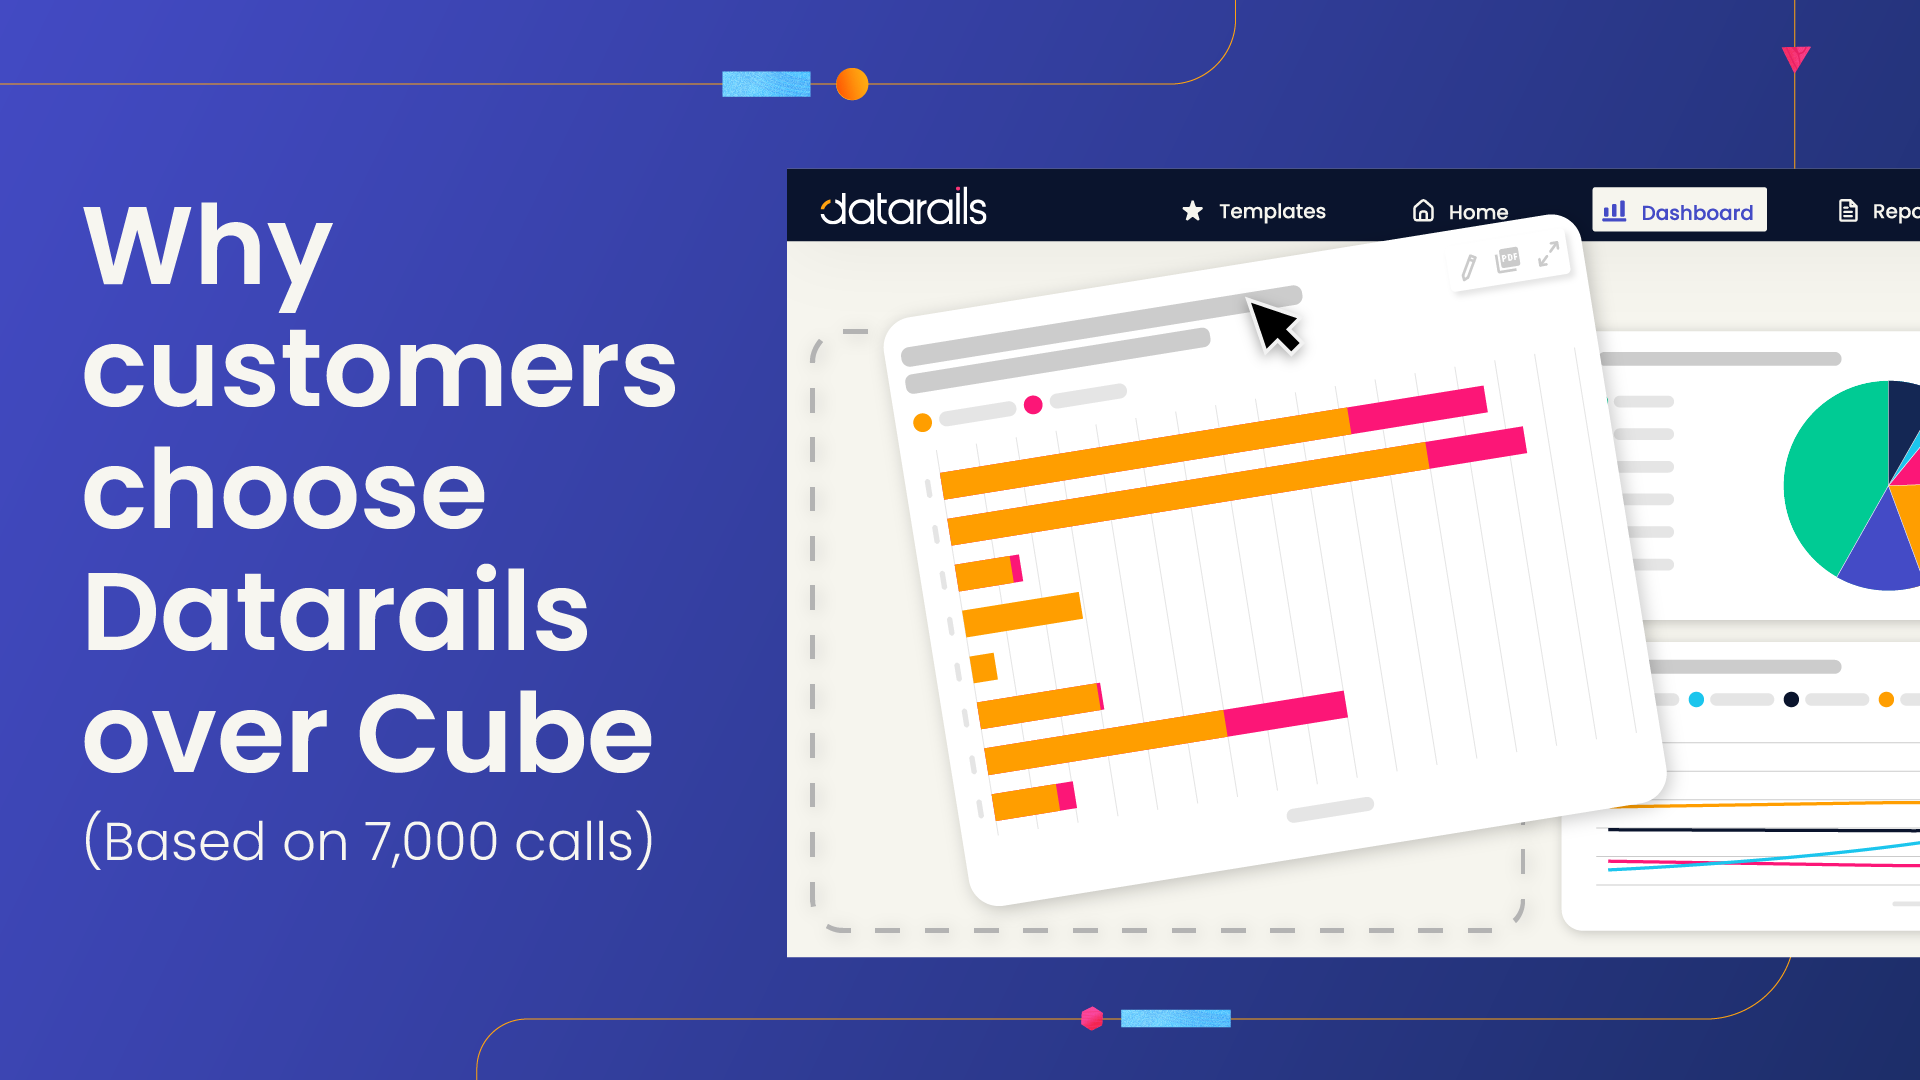 Why Customers Choose Datarails over Cube (based on 7000 calls)